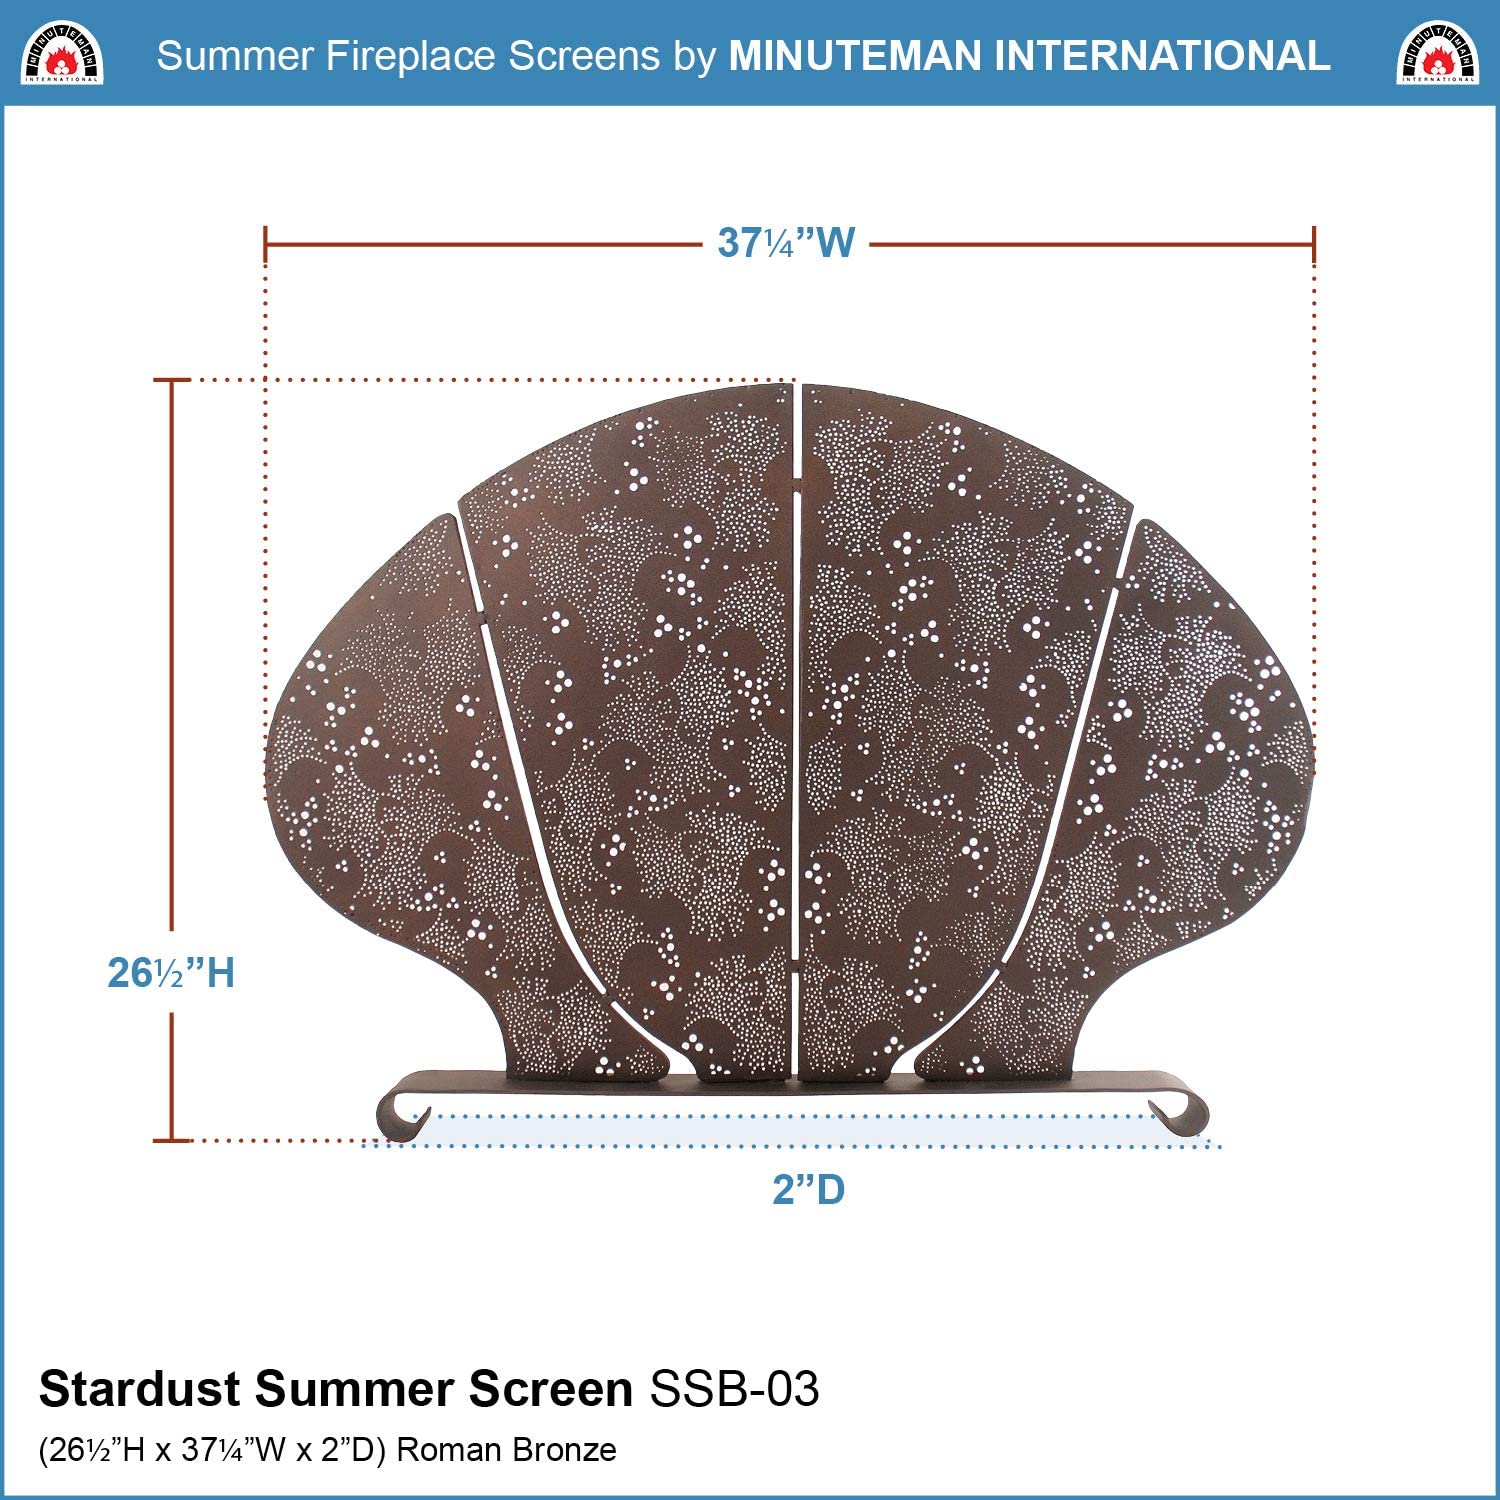 Achla Designs Stardust Summer Fireplace Screen - image 3 of 3